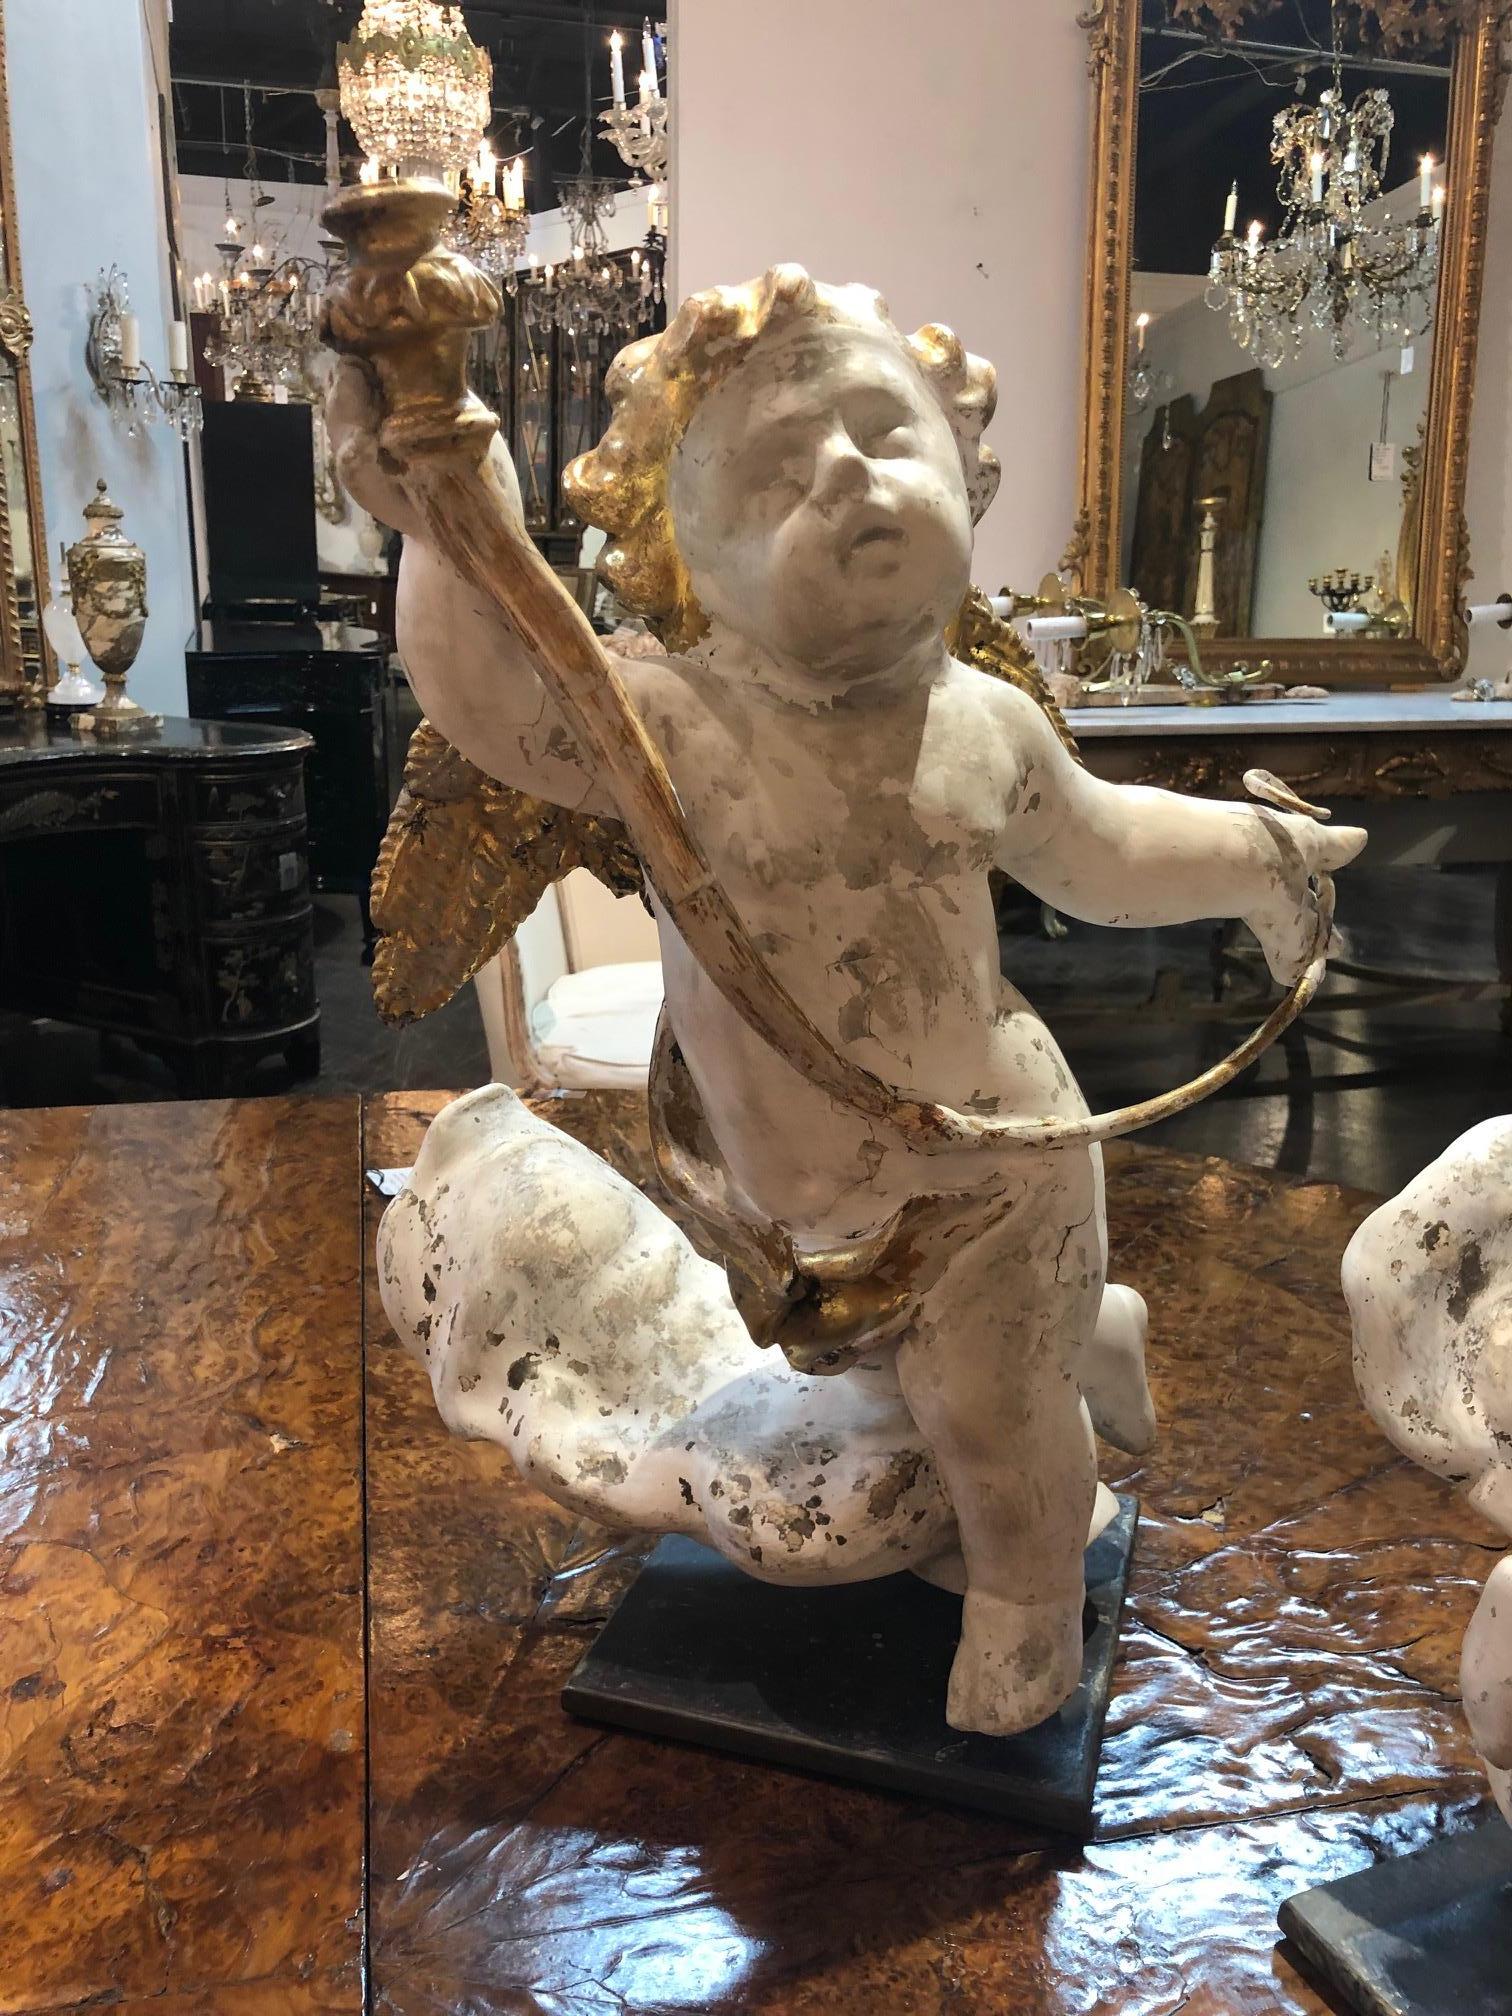 Very impressive 18th century pair of carved and parcel gilt cherubs on steel stands from Italy. Lovely carving and patina on these.